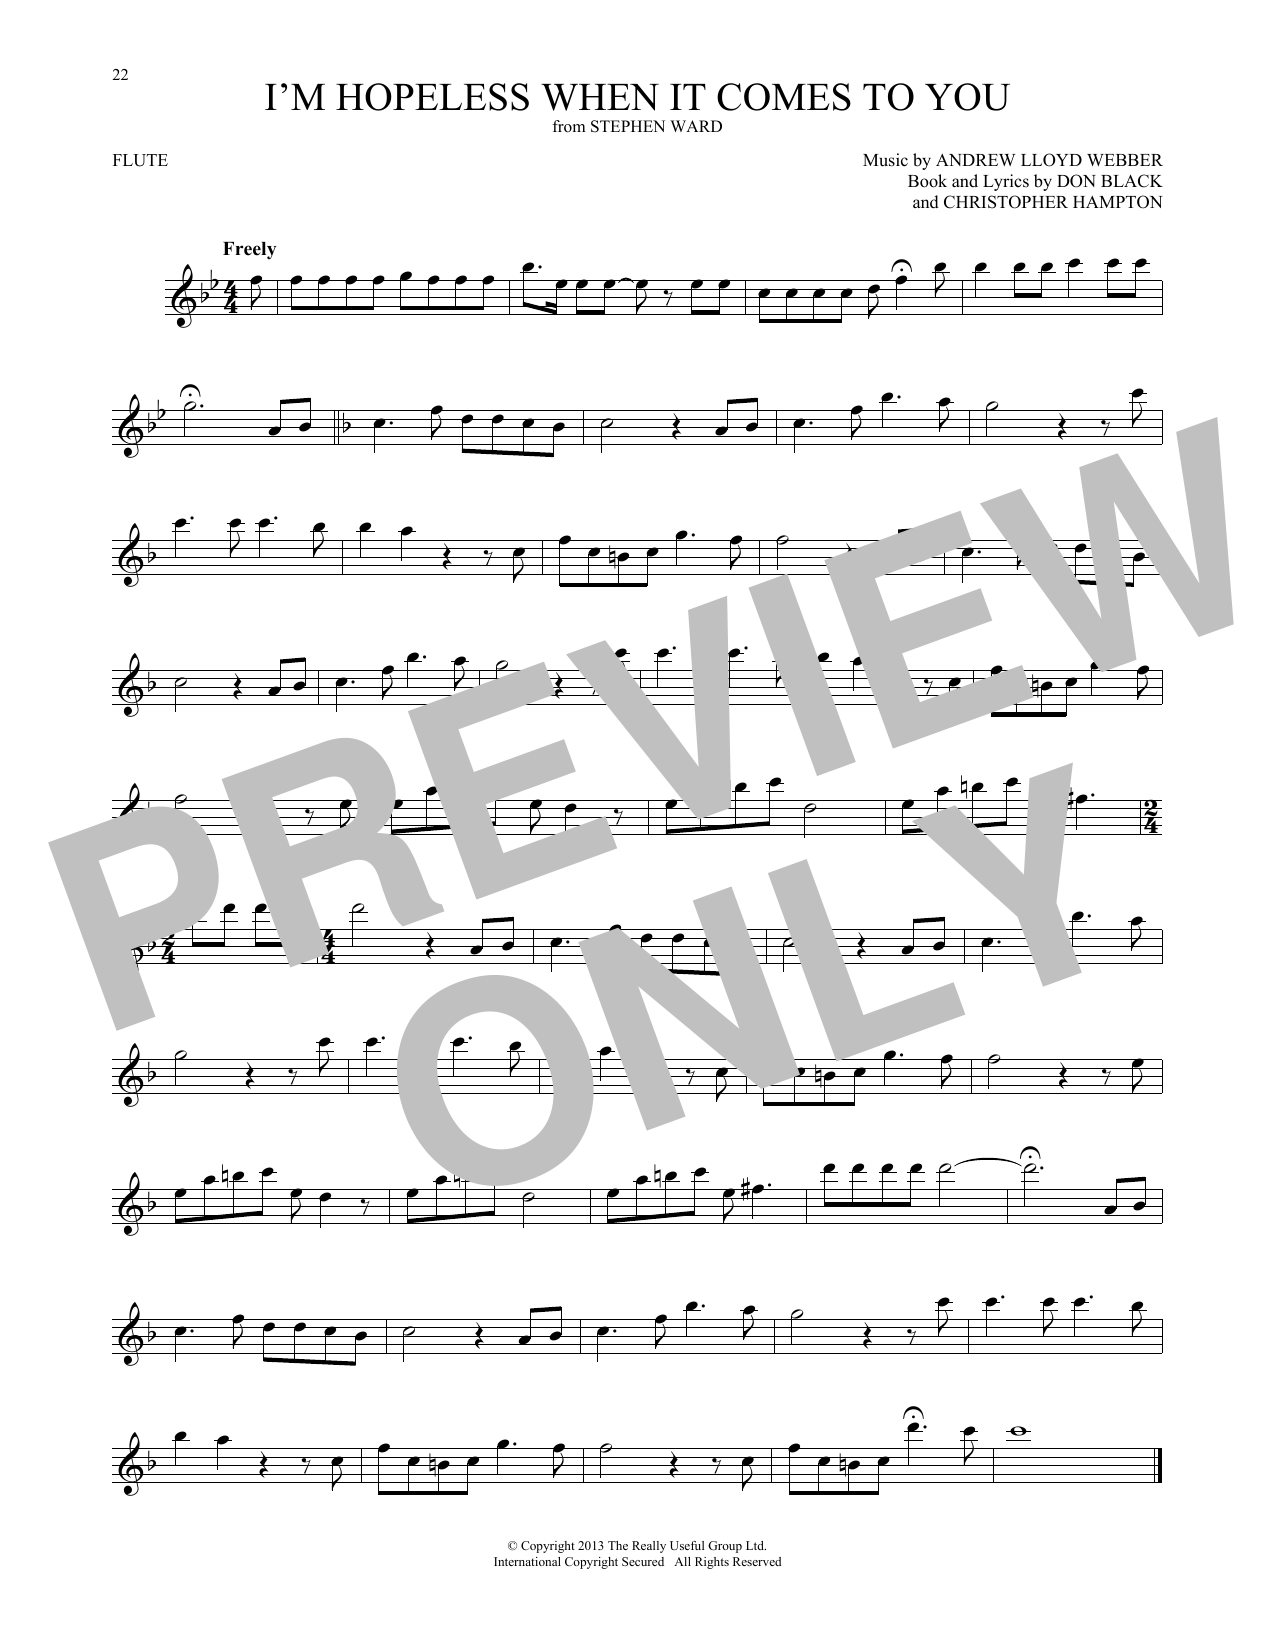 Download Andrew Lloyd Webber I'm Hopeless When It Comes To You (from Sheet Music